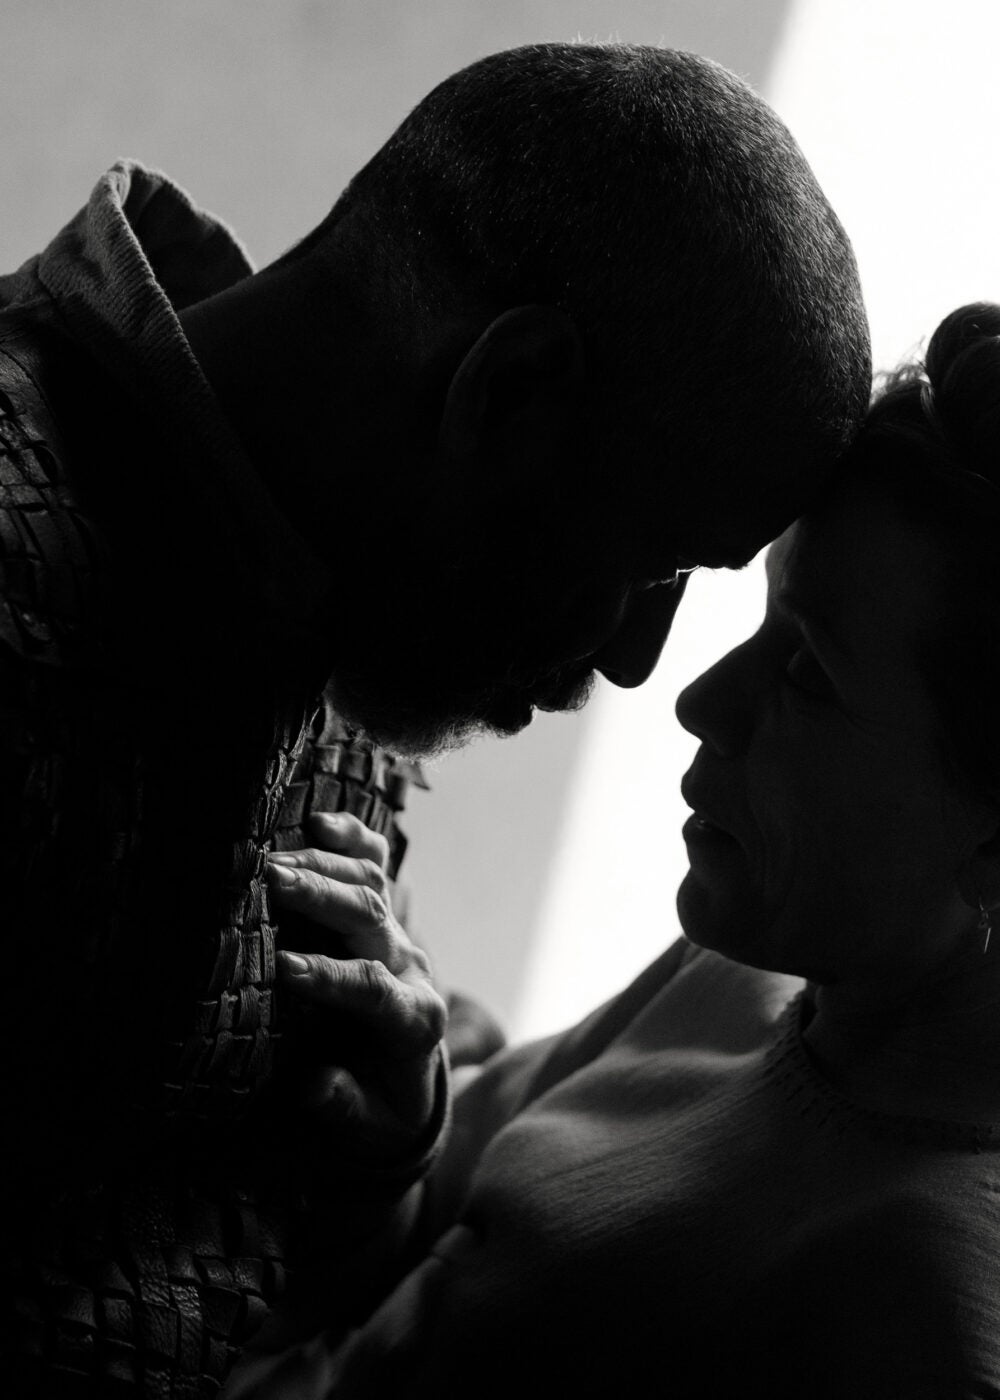 Silhouettes of Denzel Washington and Frances McDormand in “The Tragedy of Macbeth.”